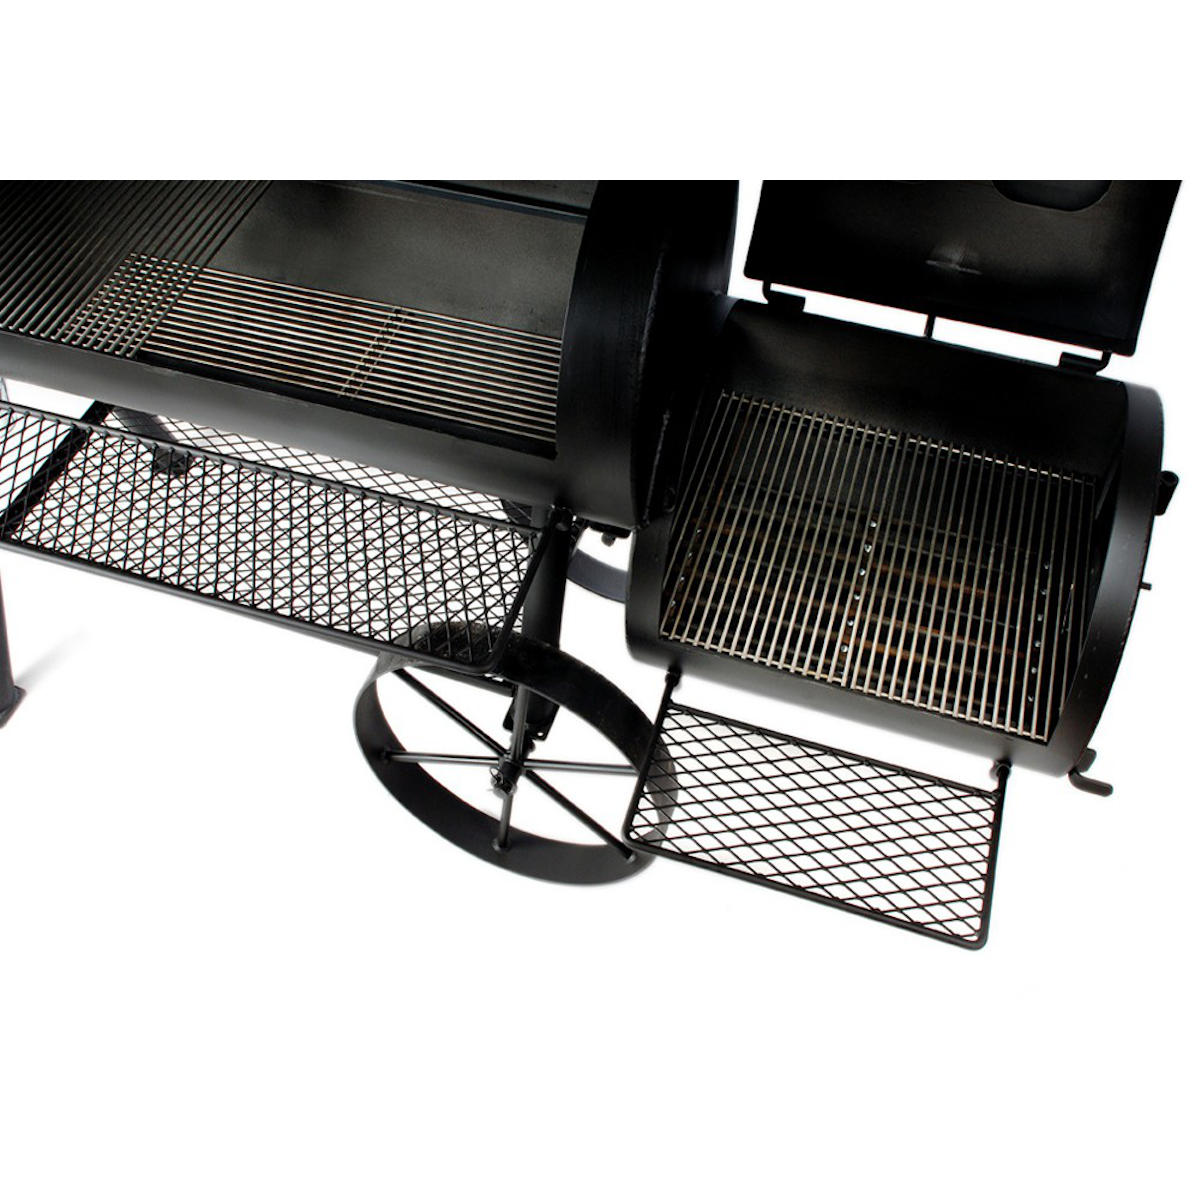 Joe's Barbeque Grillrost Edelstahl für 16"Tradition, Classic, Special